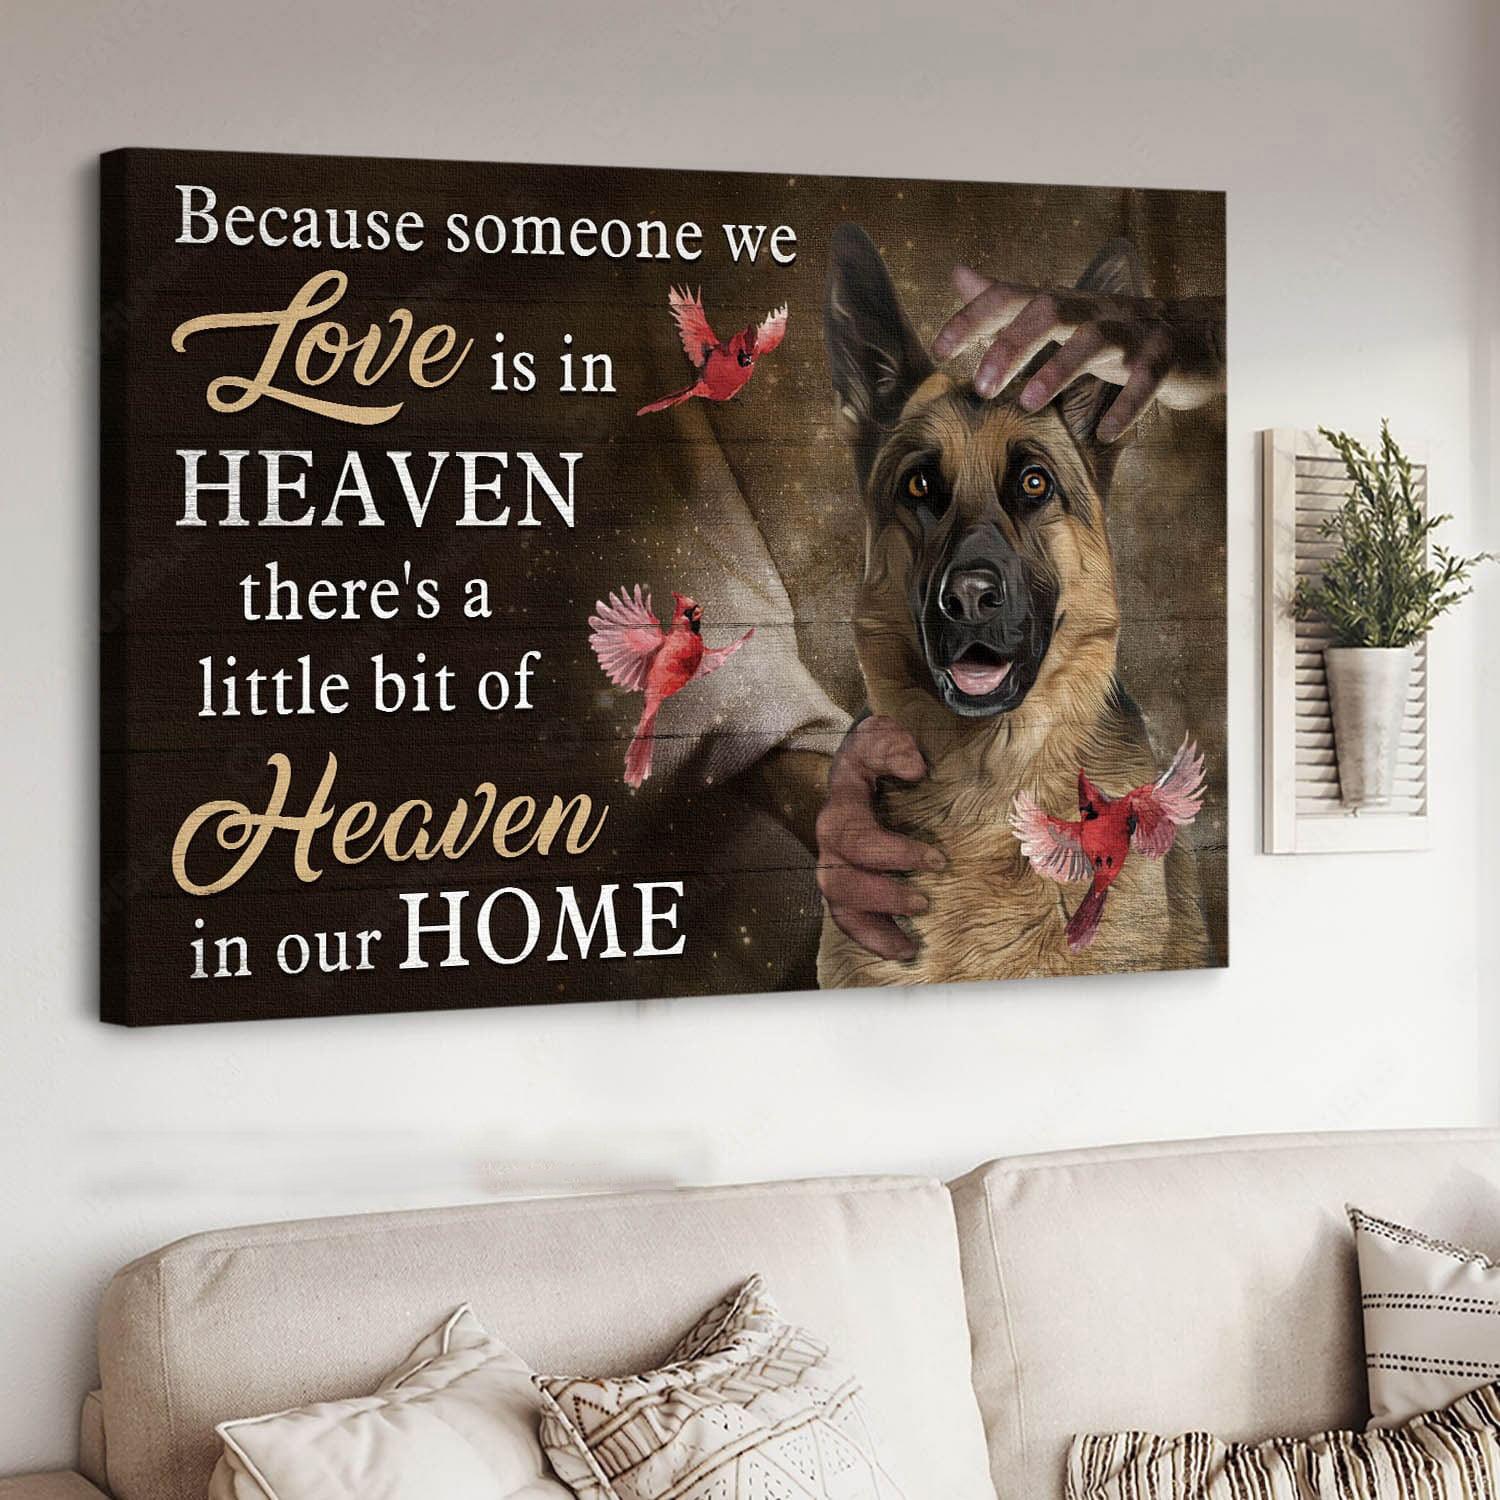 German Shepherd Premium Wrapped Landscape Canvas - German Shepherd, Cardinal, There's A Little Bit Of Heaven In Our Home - Gifts For Family Members - Amzanimalsgift